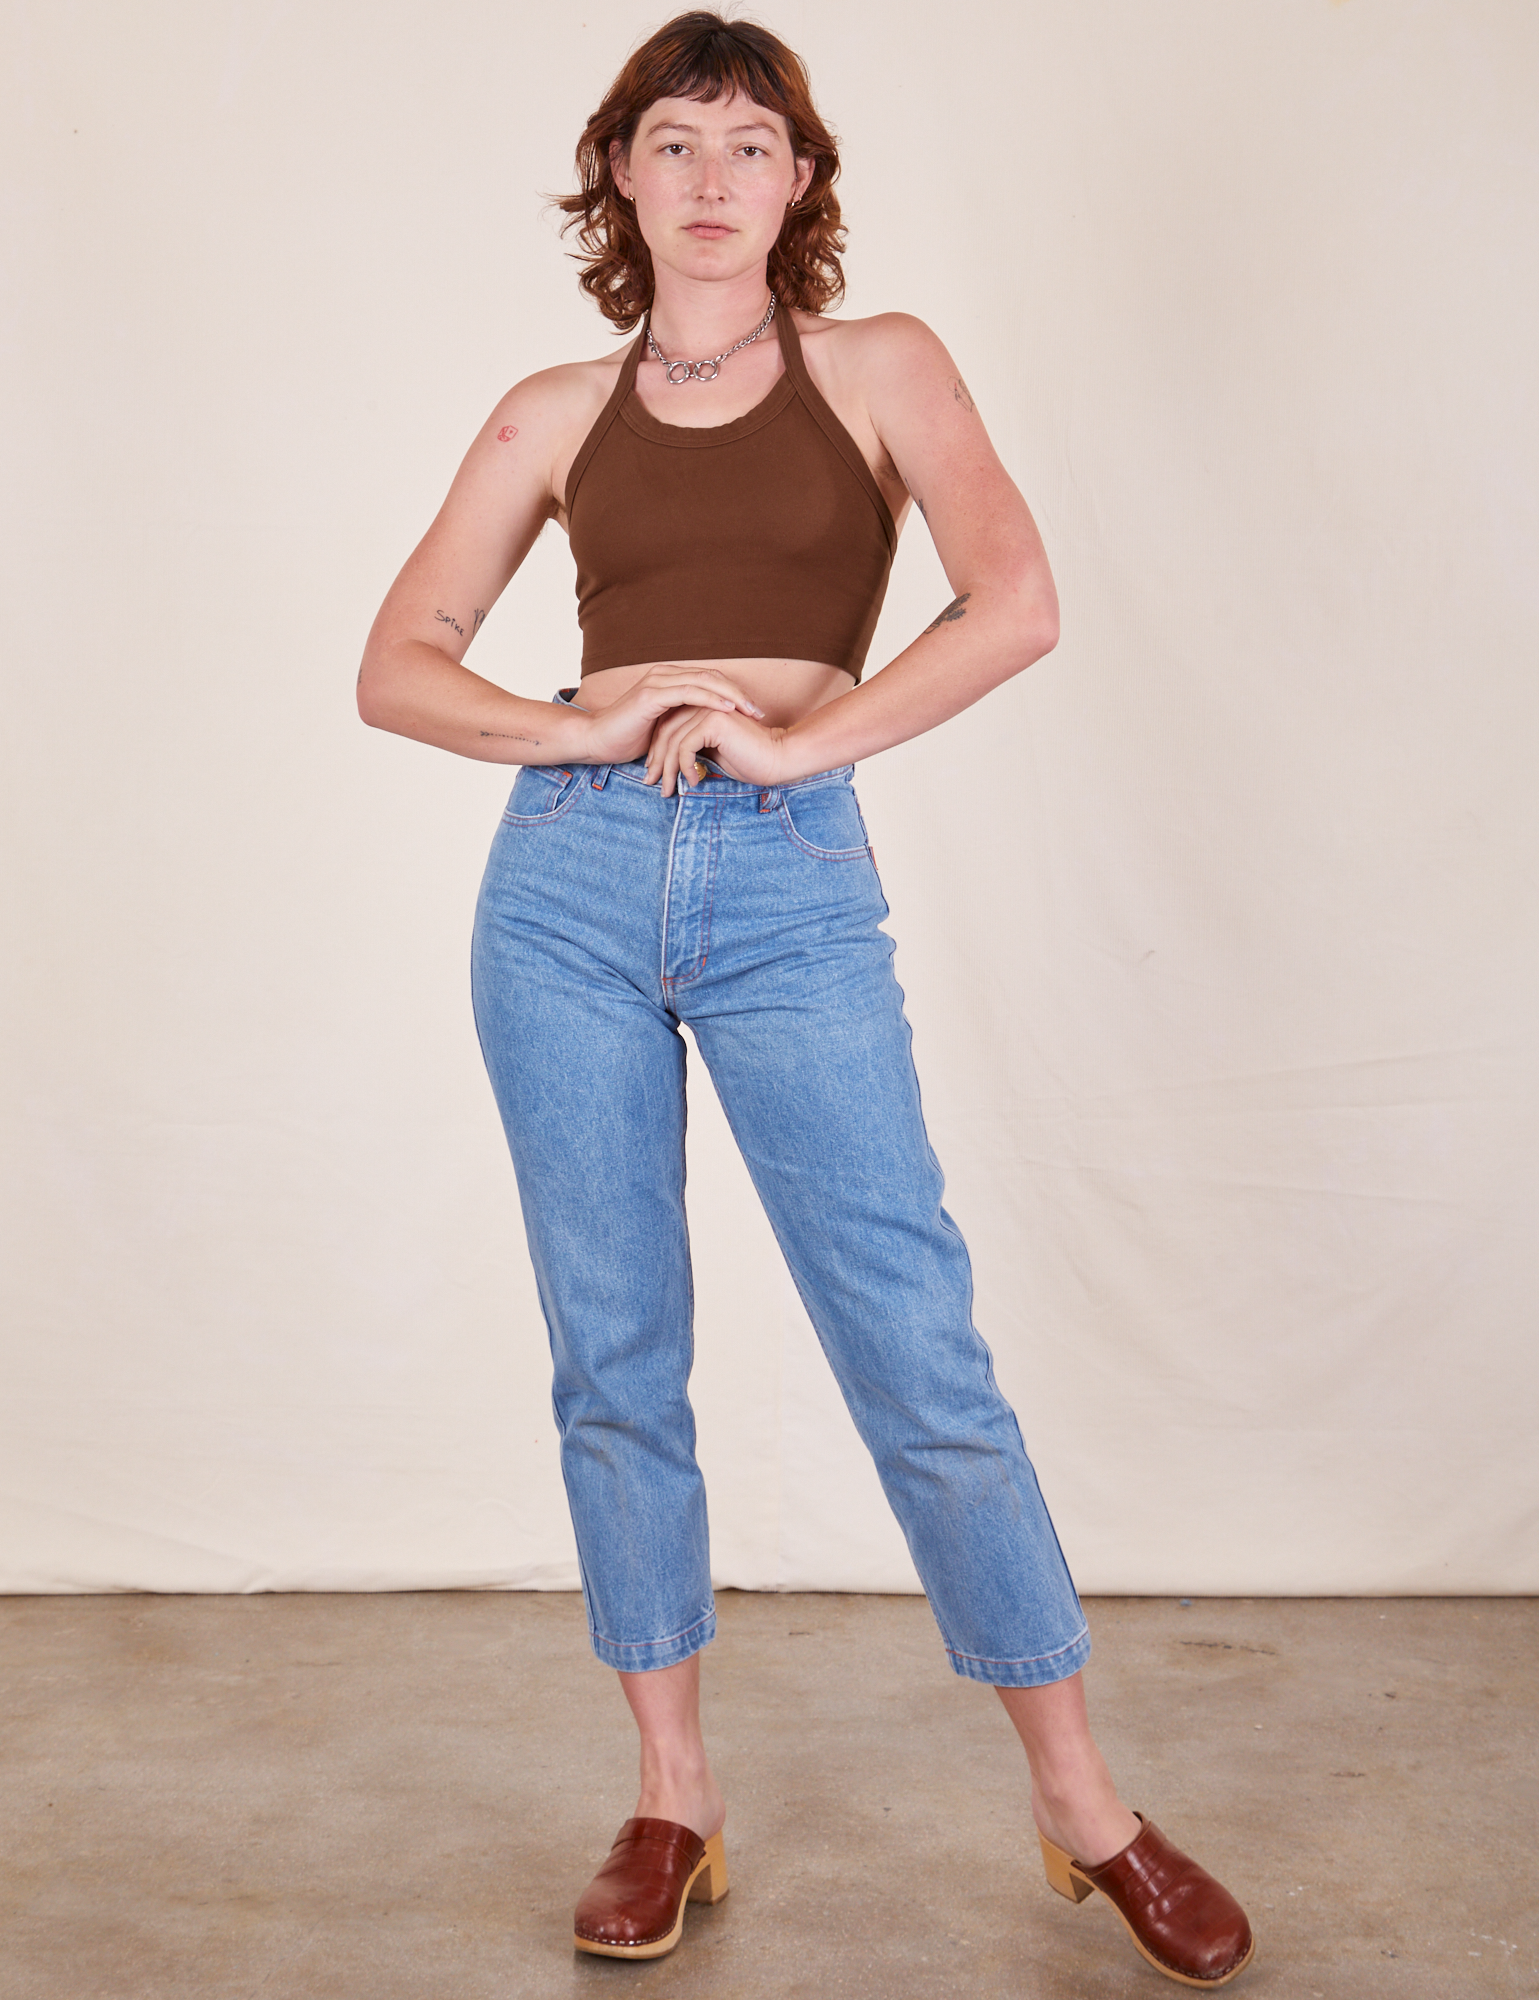 Alex is wearing Halter Top in Fudgesicle Brown and light wash Frontier Jeans 